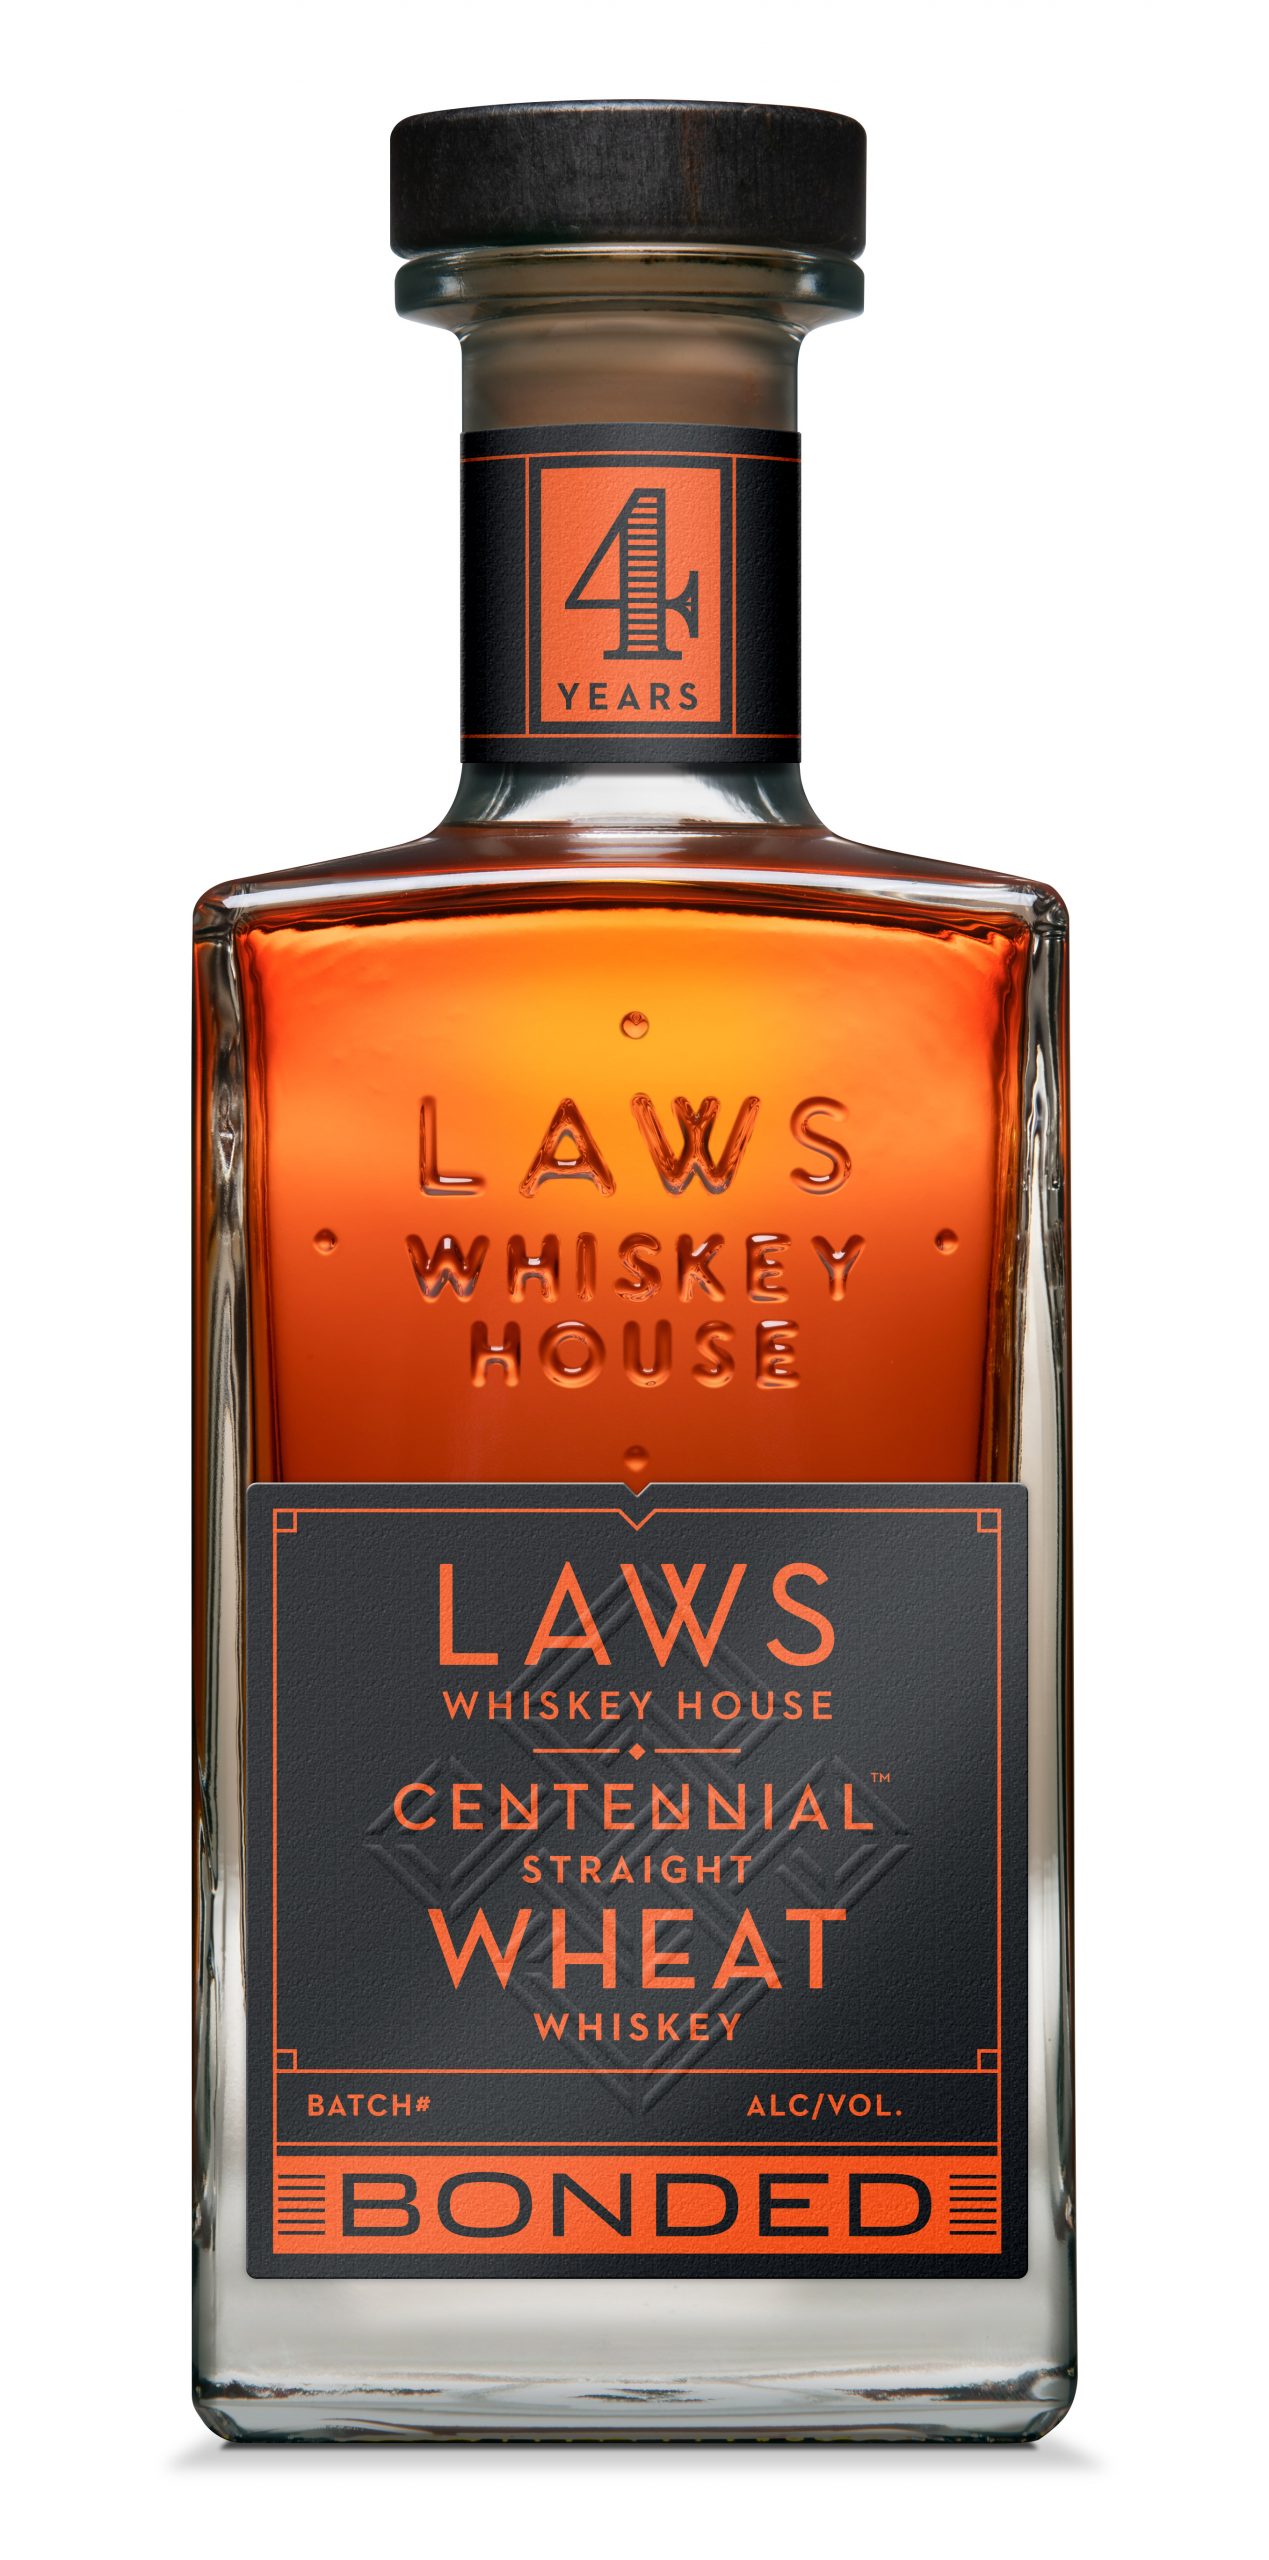 Laws Bonded Centennial Straight Wheat Whiskey. Courtesy Laws Whiskey House.